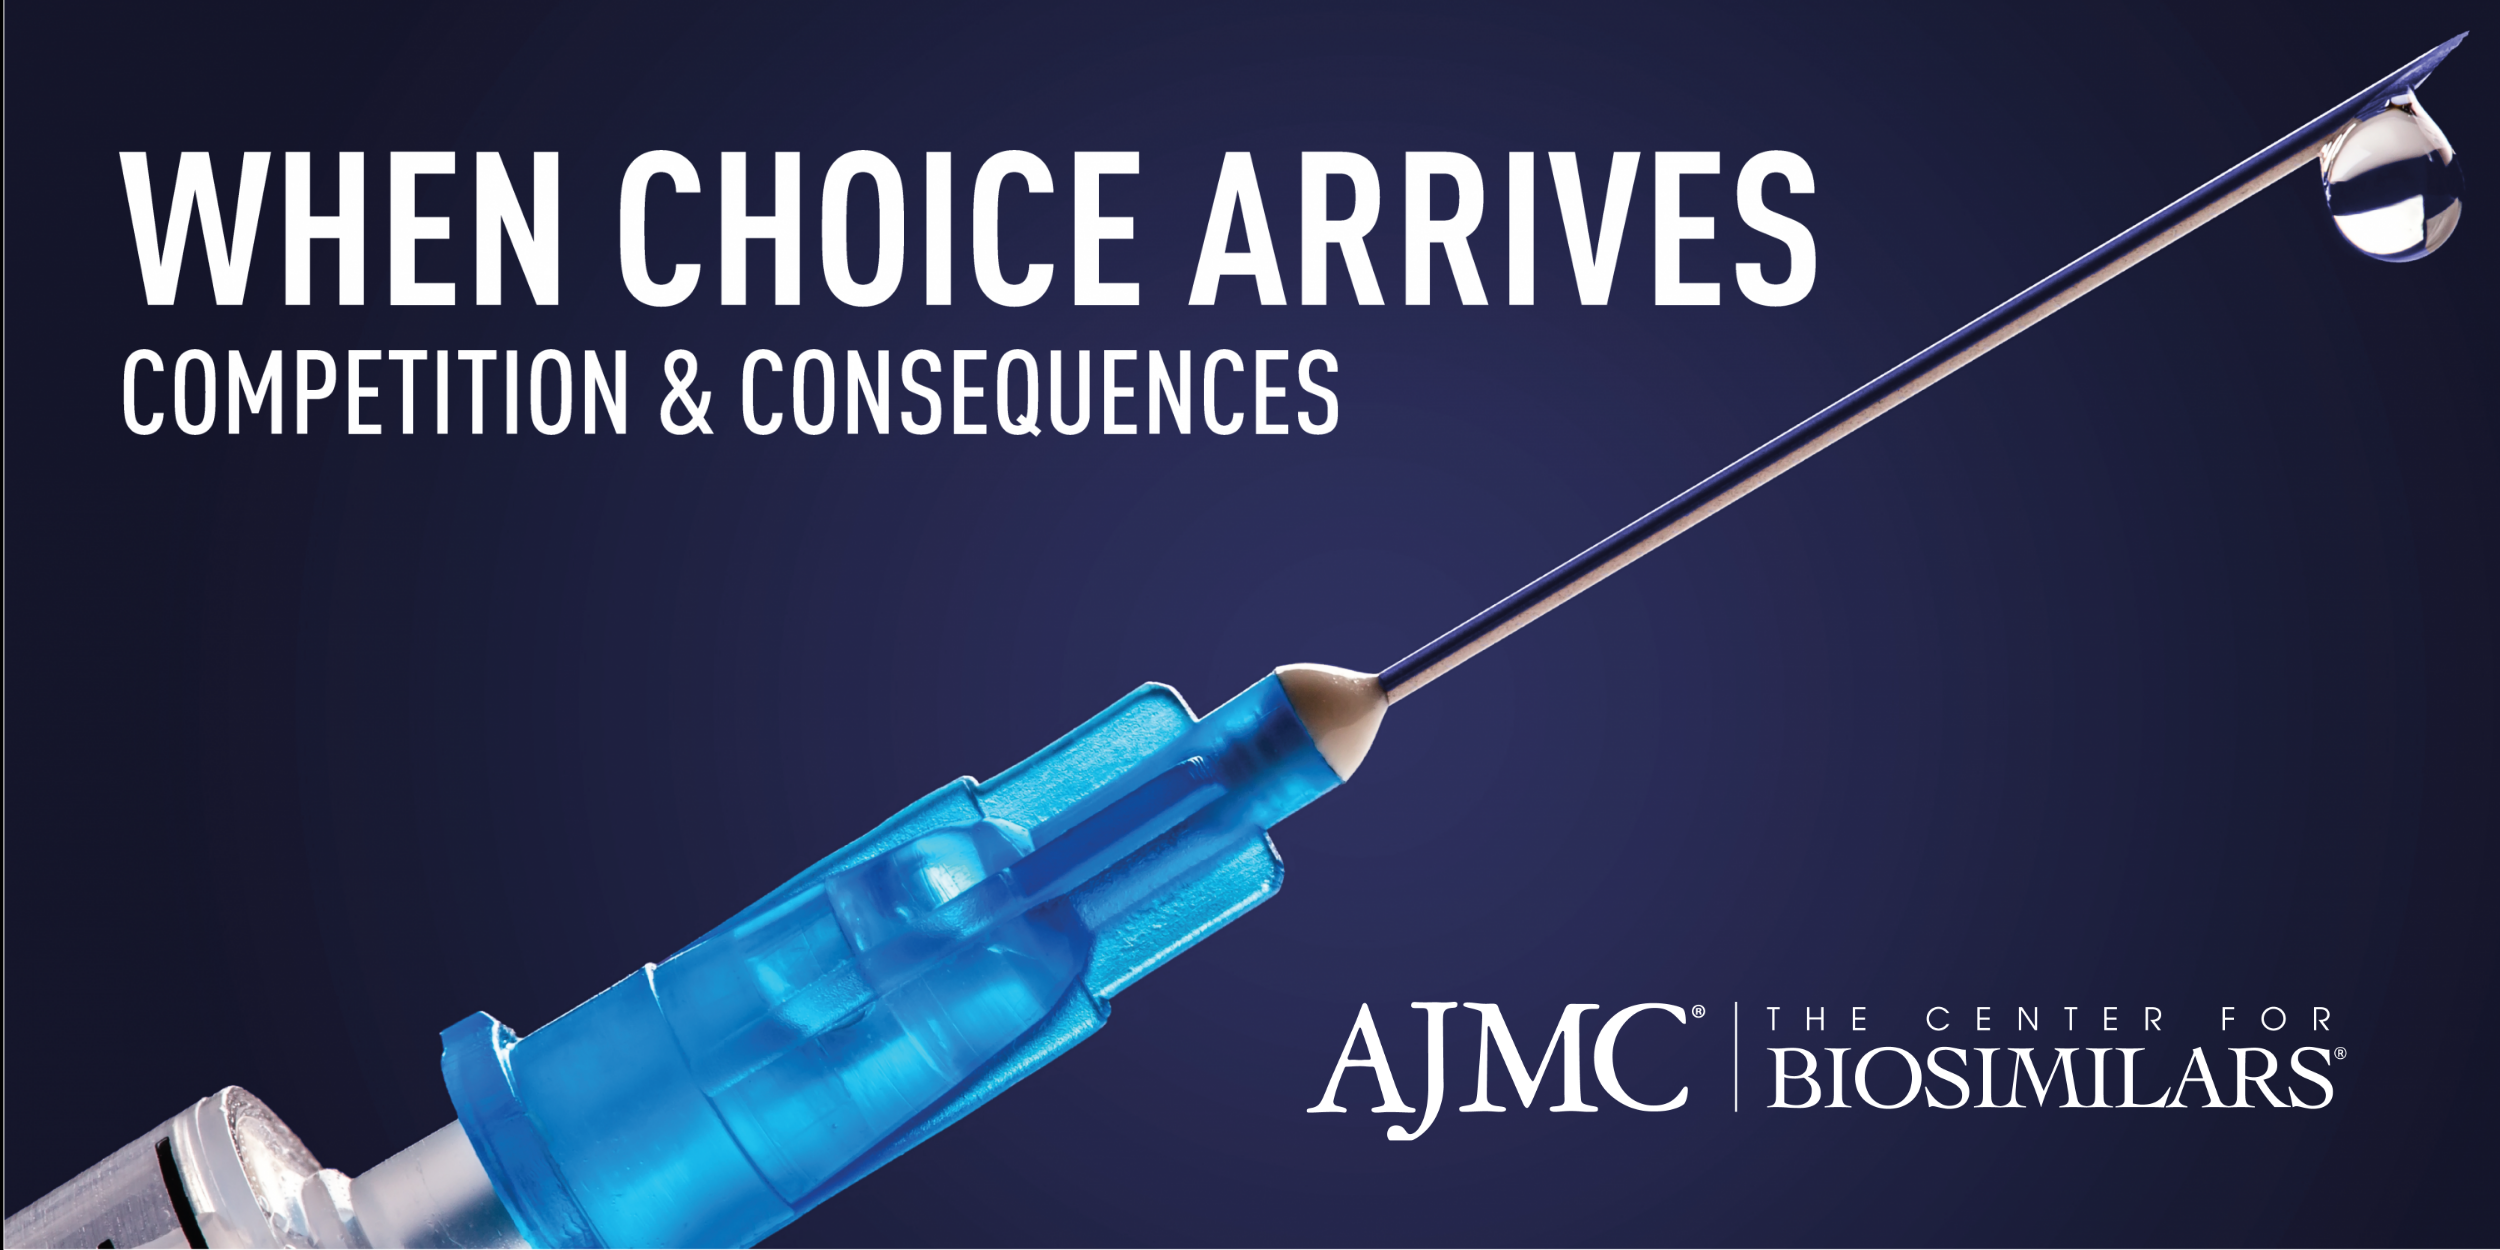 "When Choice Arrives: Competition & Consequences" written over a bright blue syringe with the AJMC/The Center for Biosimilars logo in the bottom right corner